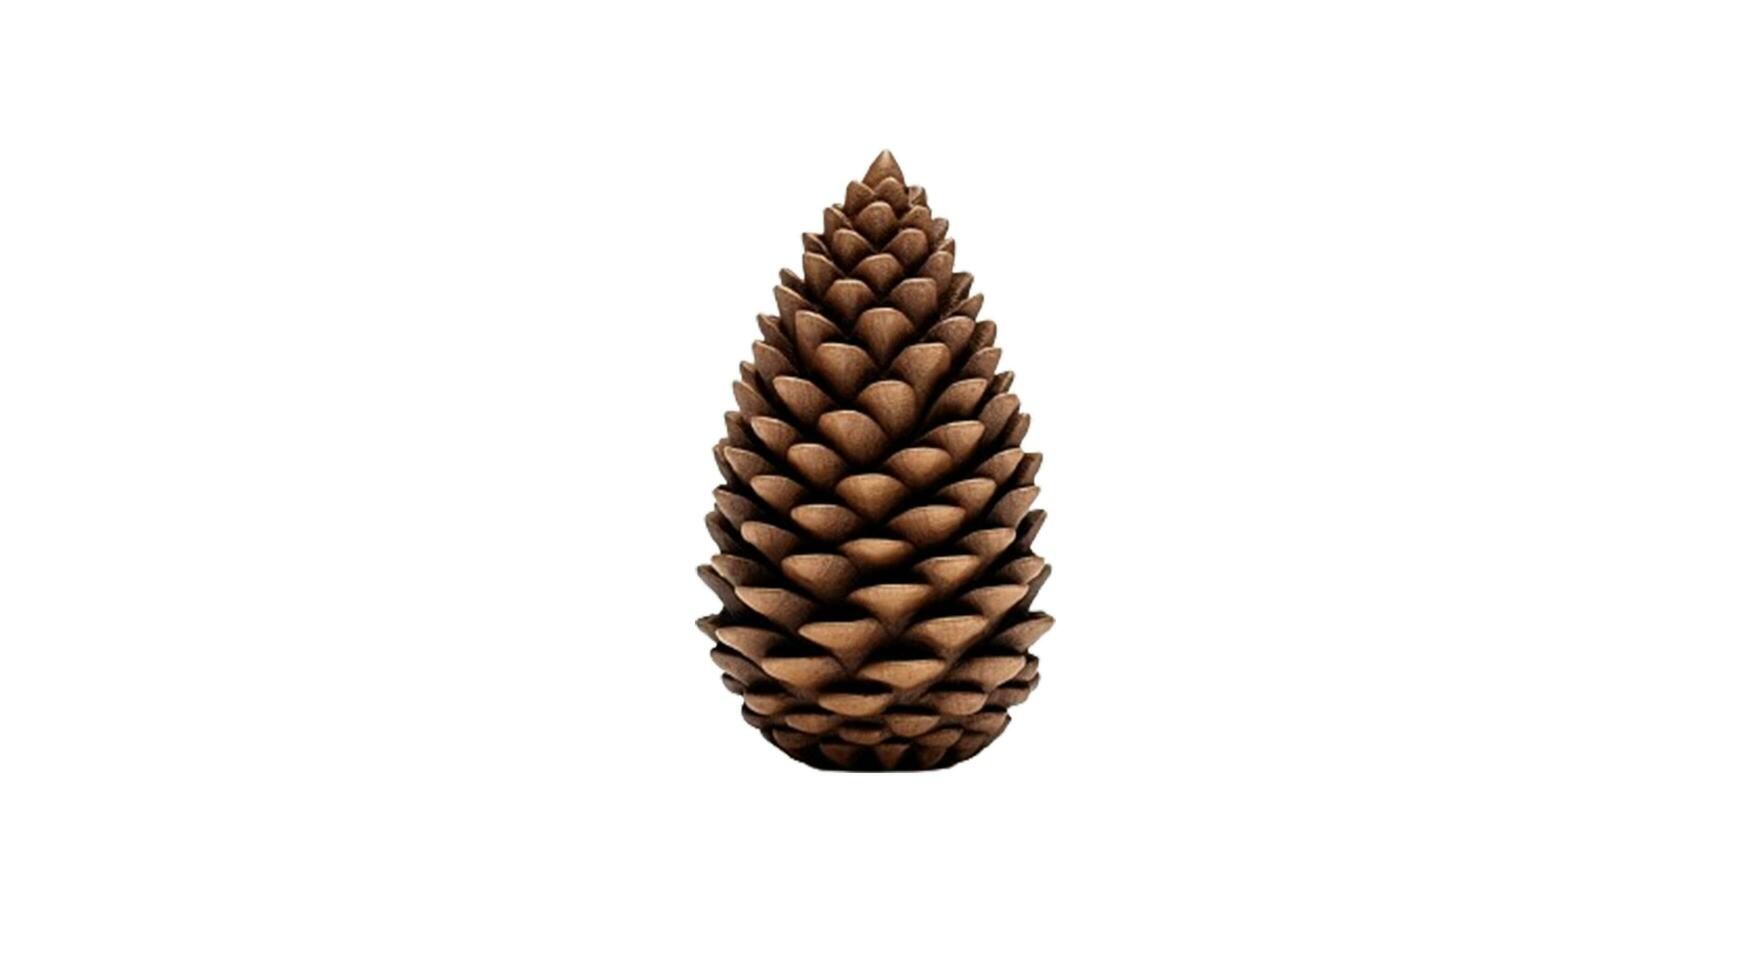 609,539 Pine Cone Images, Stock Photos, 3D objects, & Vectors